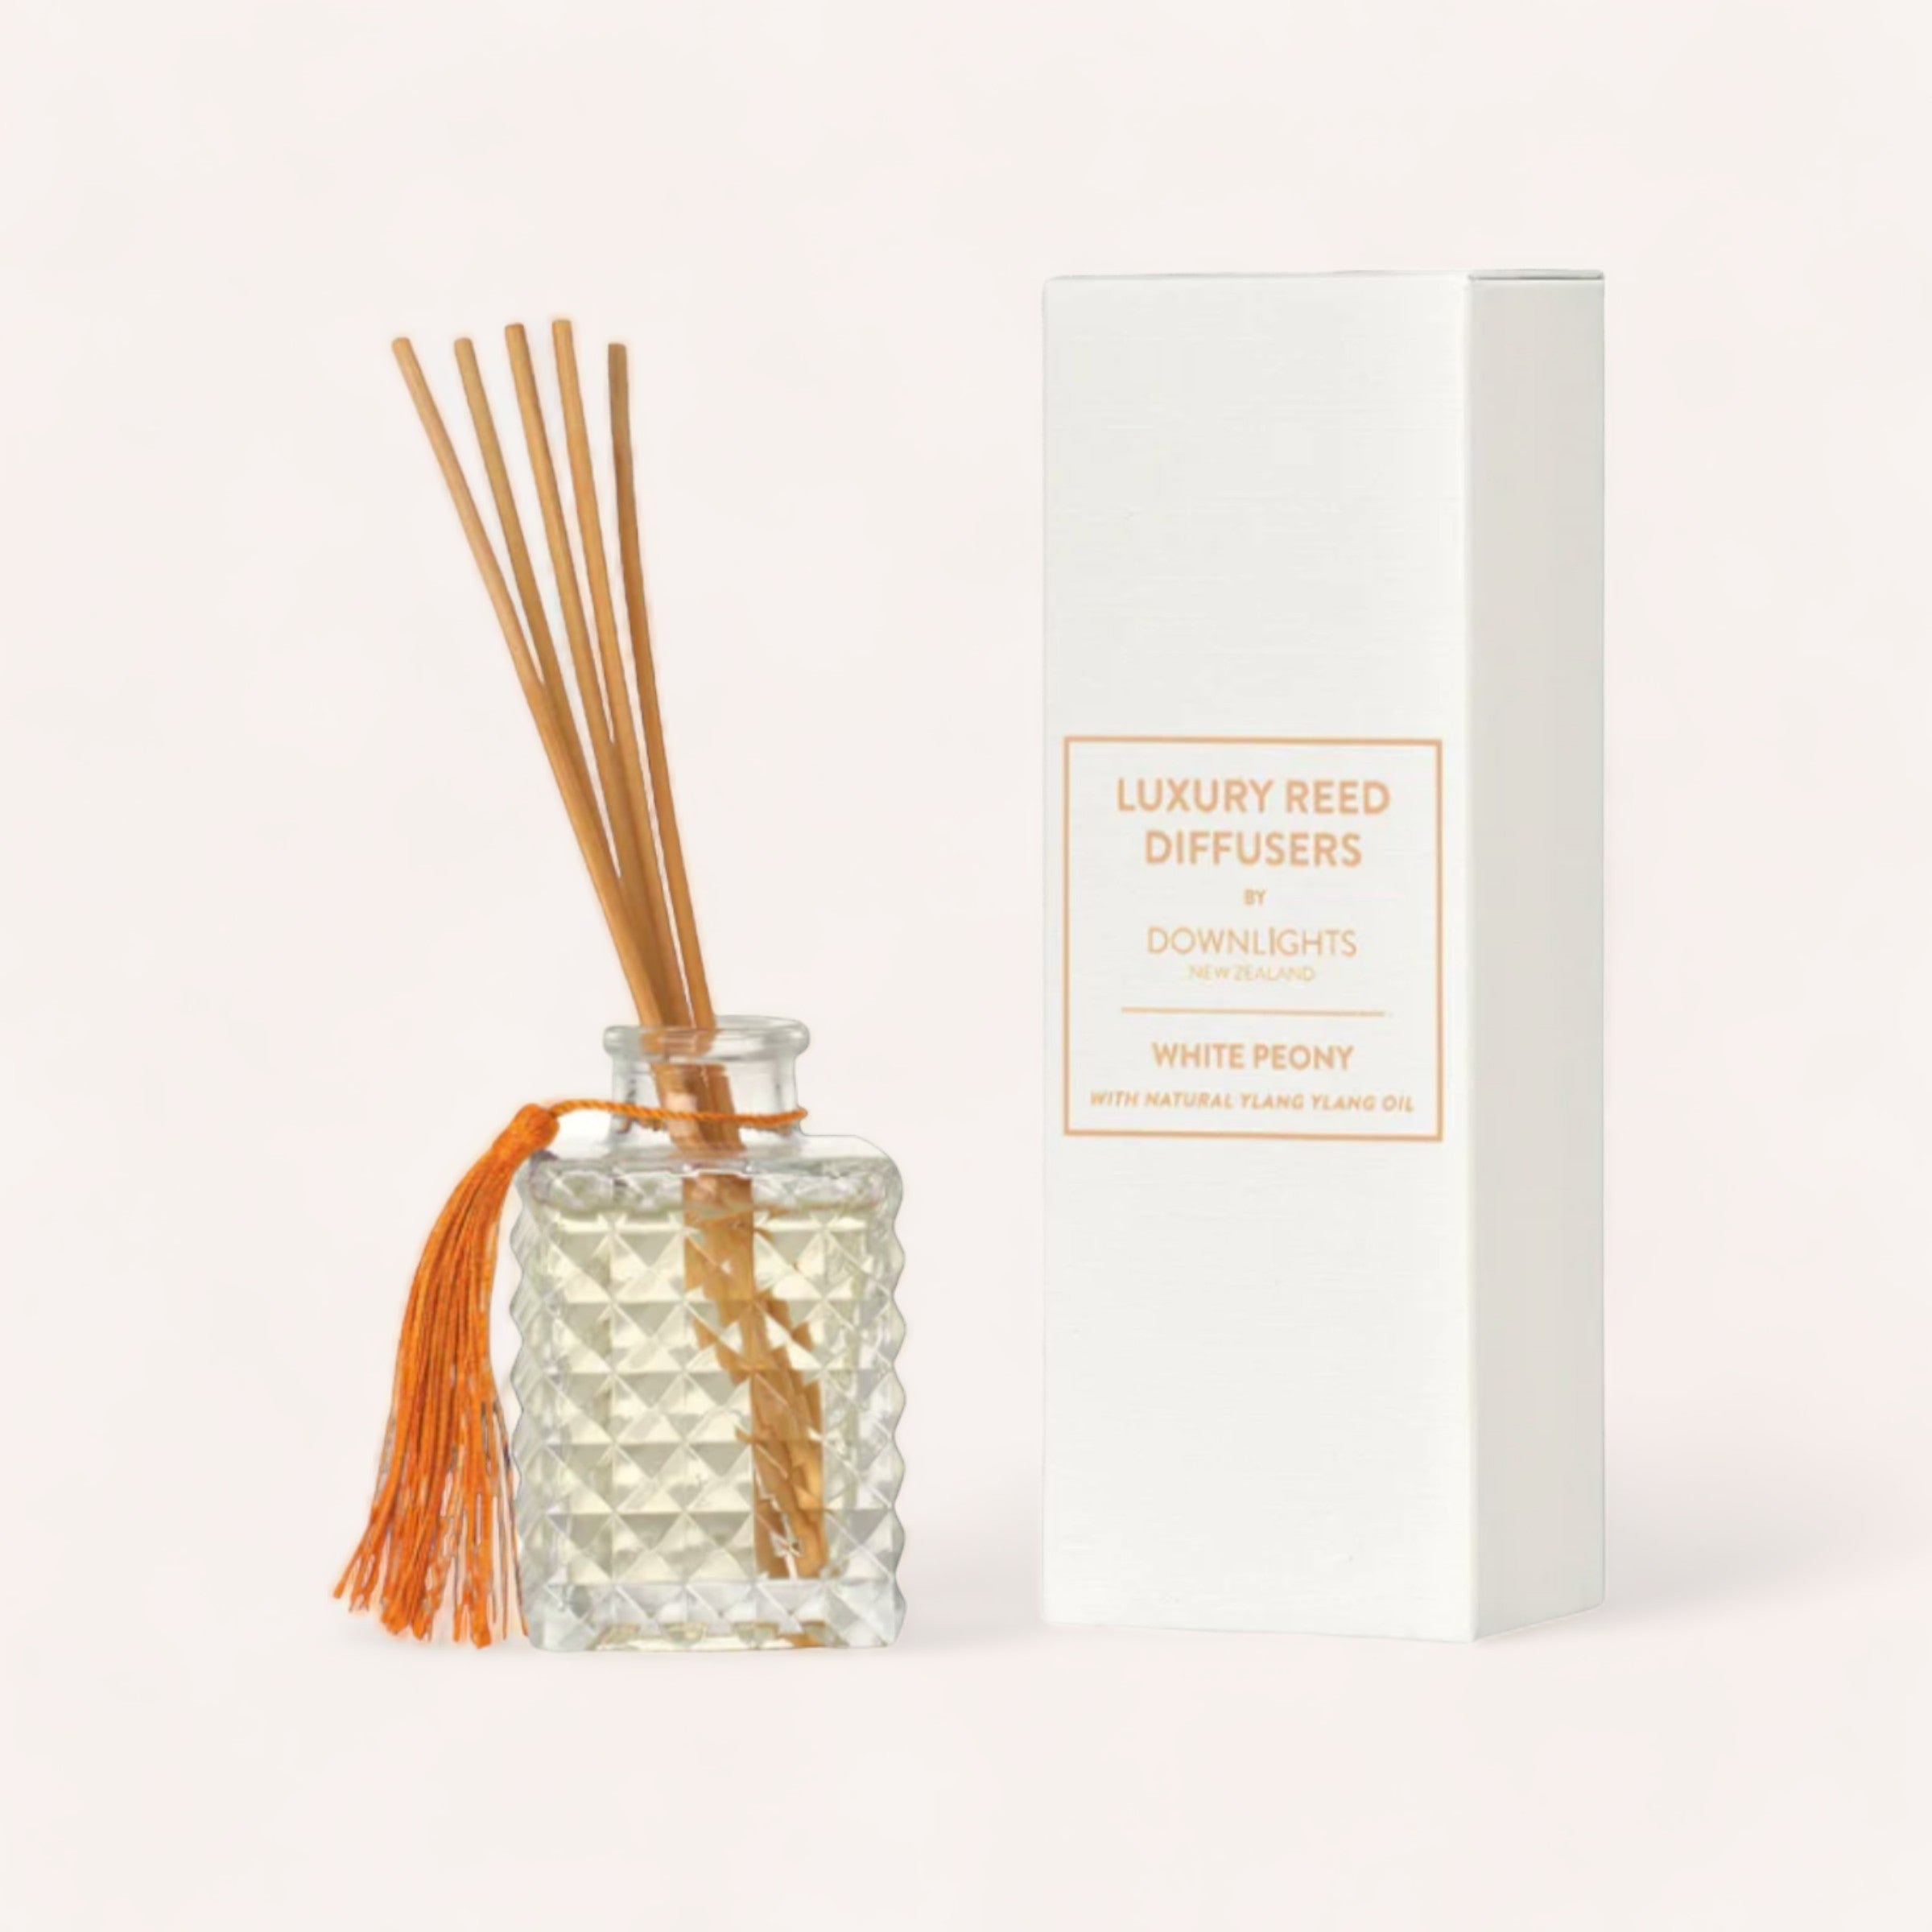 A luxury White Peony Diffuser by Downlights, with the scent of soft white peonies, accompanied by several reed sticks and packaged in an elegant white box.